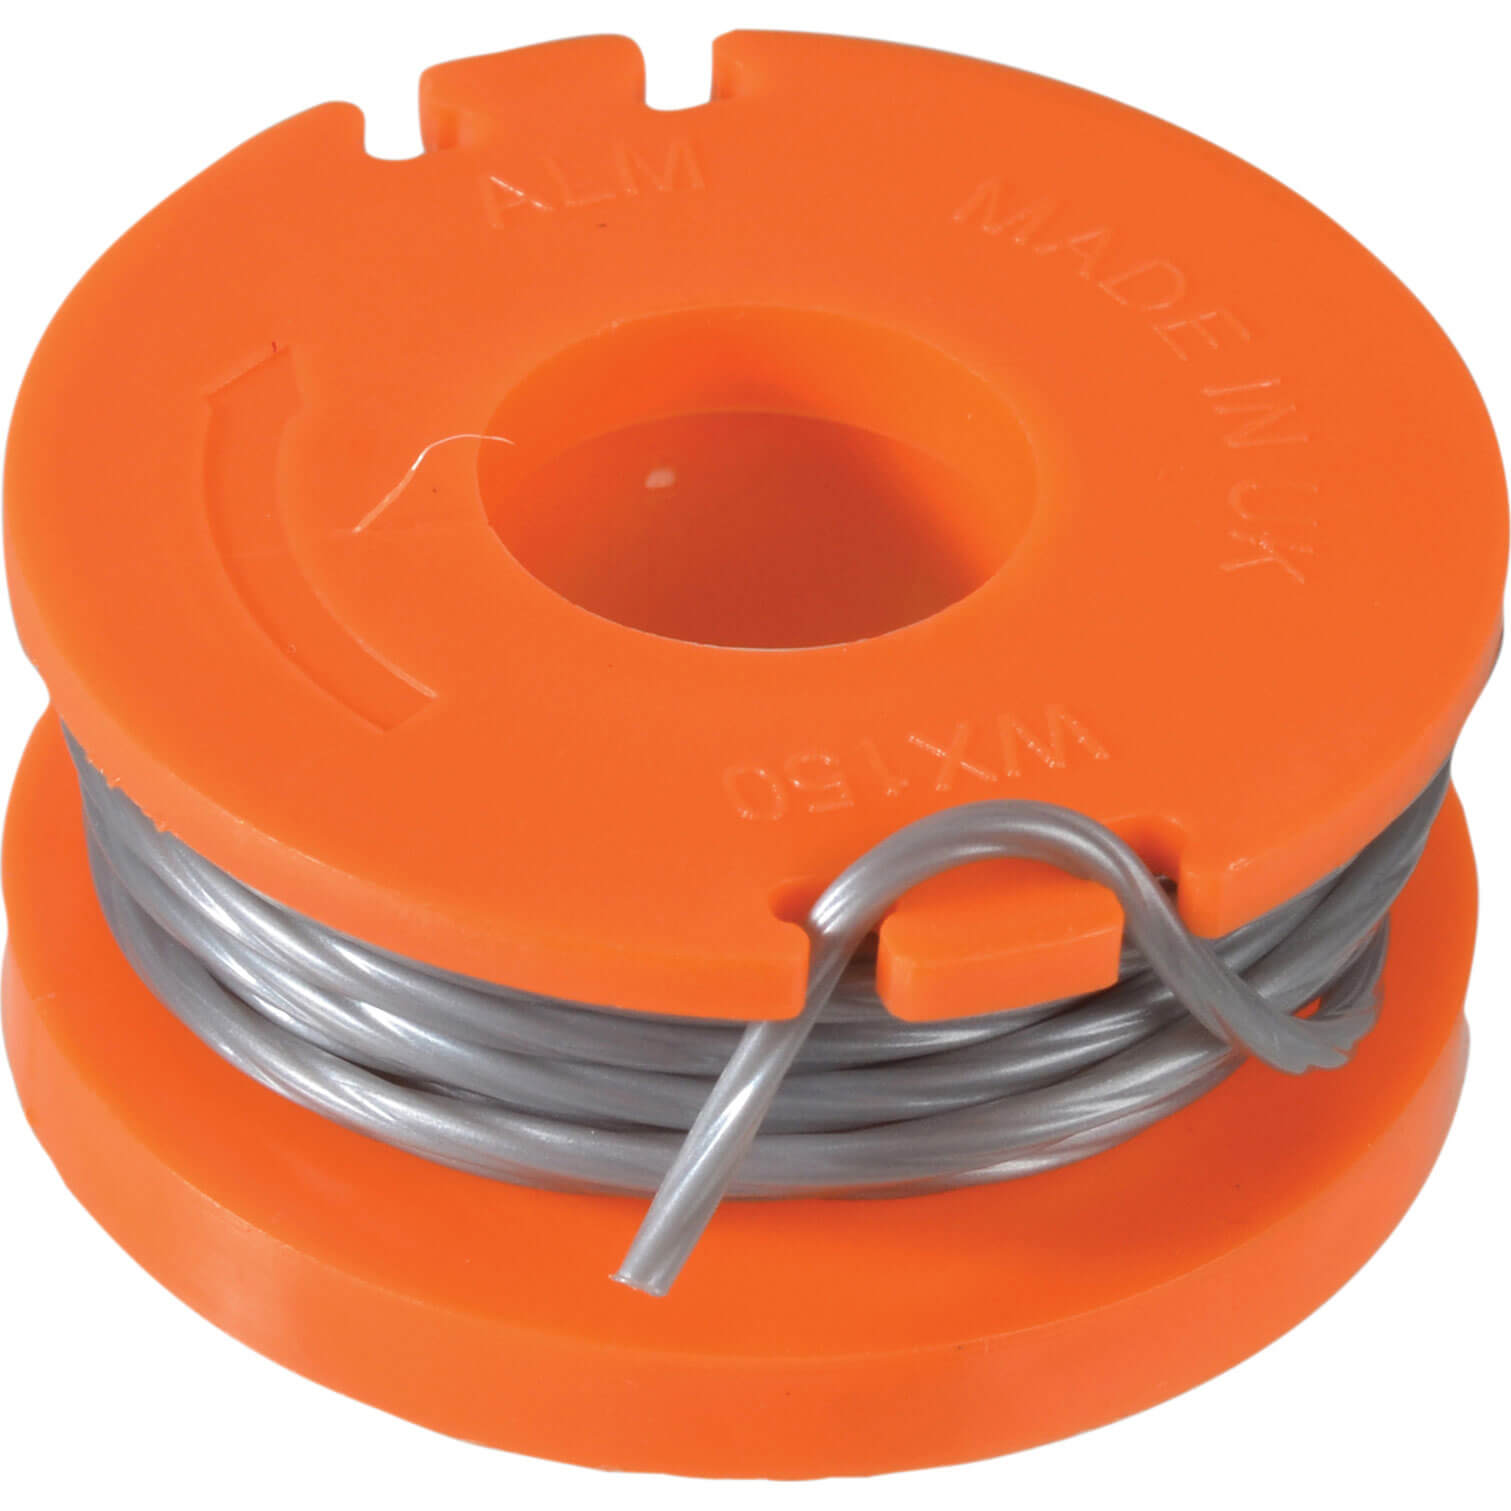 Image of ALM 1.5mm x 2.5m Spool and Line for Various Qualcast 18v Grass Trimmers Pack of 1